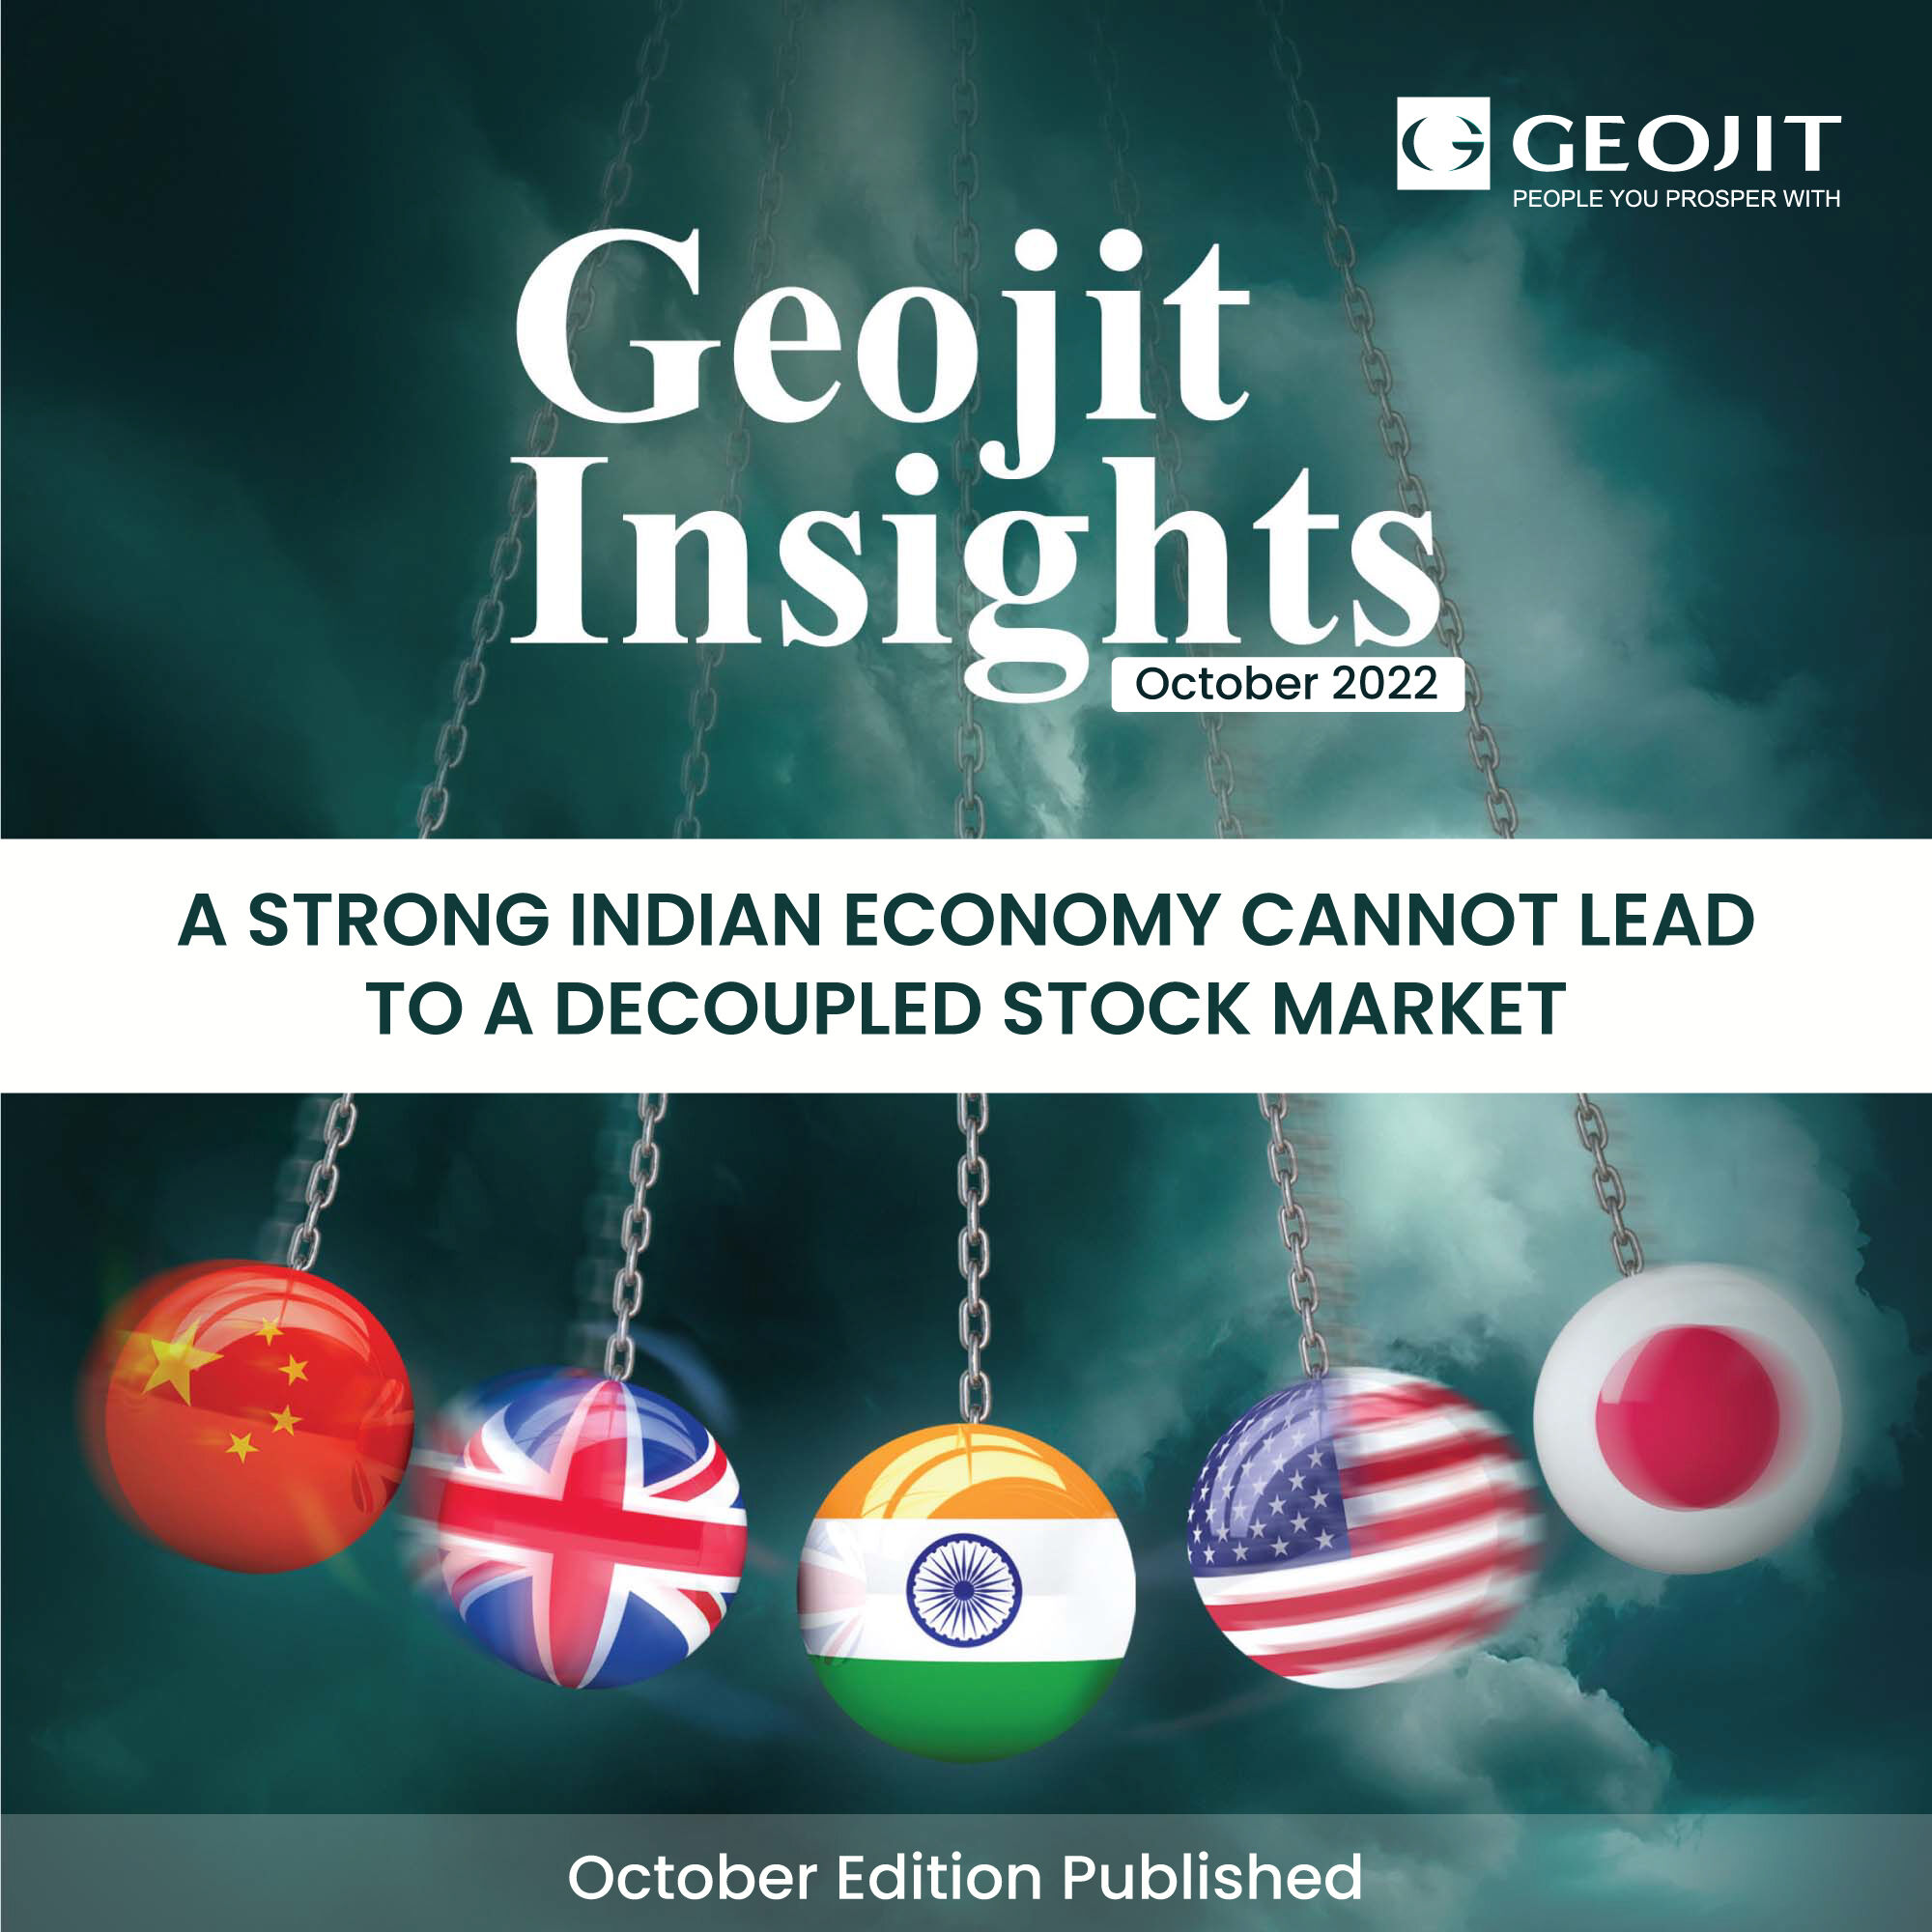 Geojit Financial Services|Legal Services|Professional Services